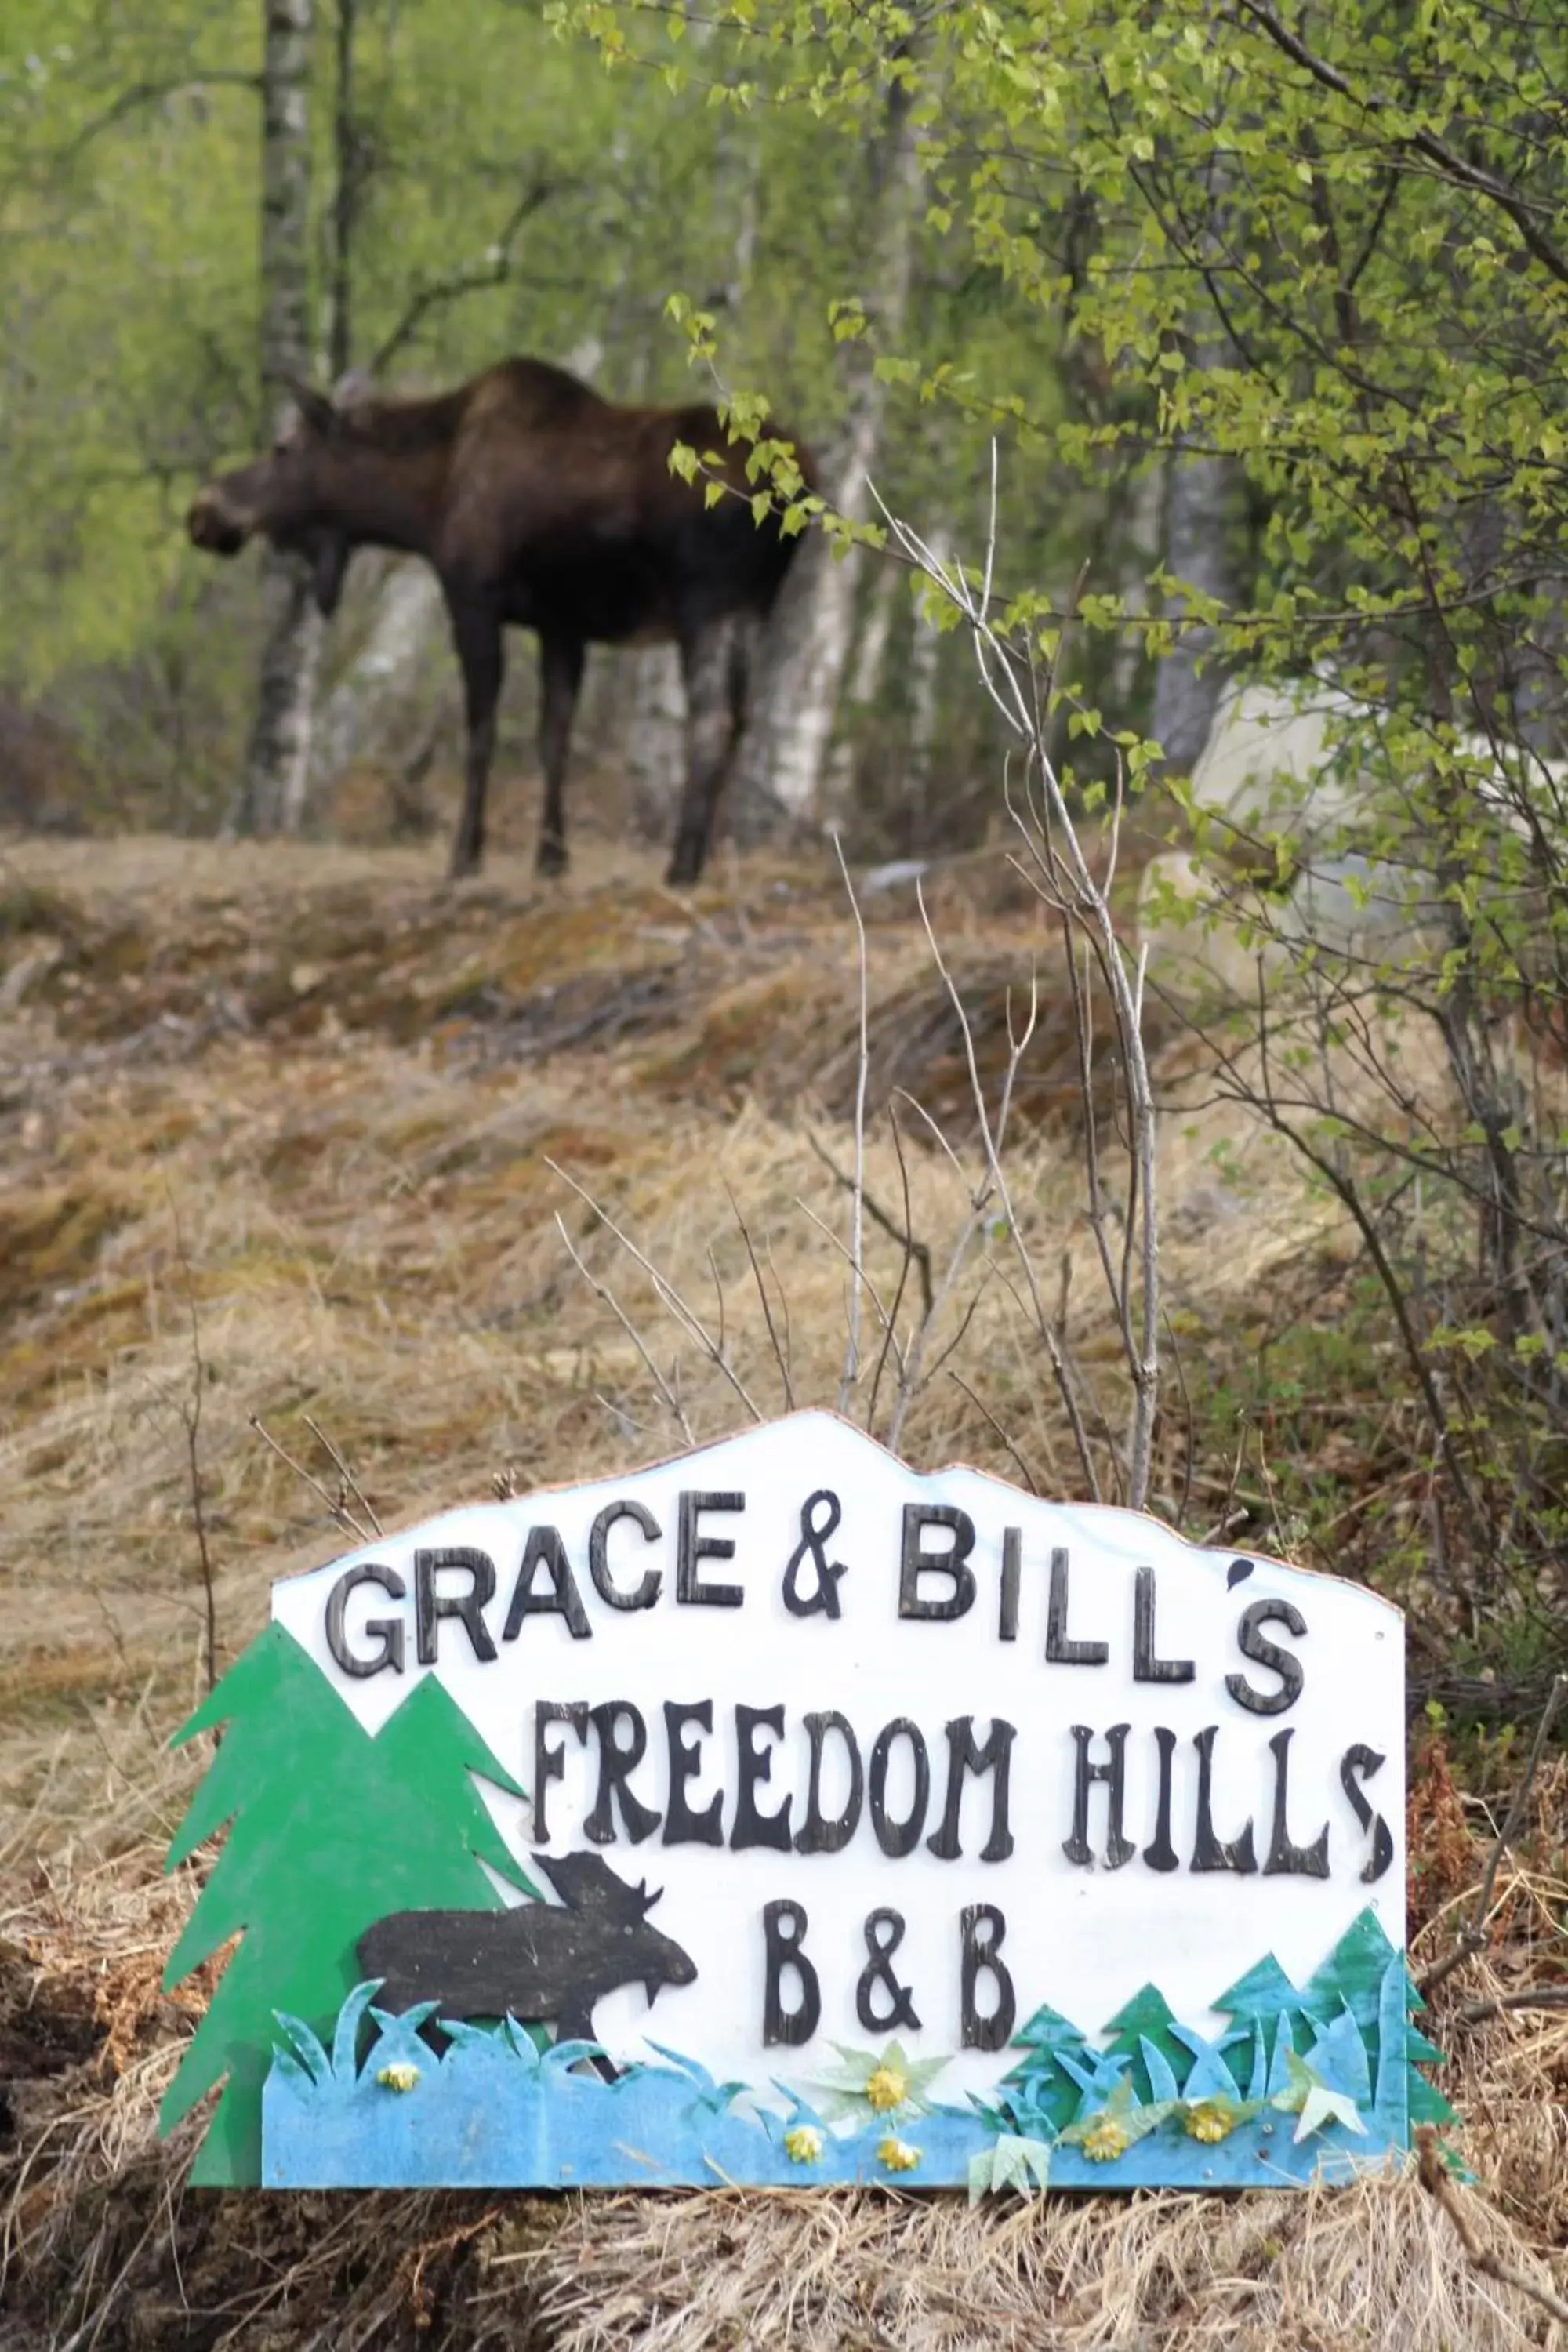 Property logo or sign in Grace and Bill's Freedom Hills B&B